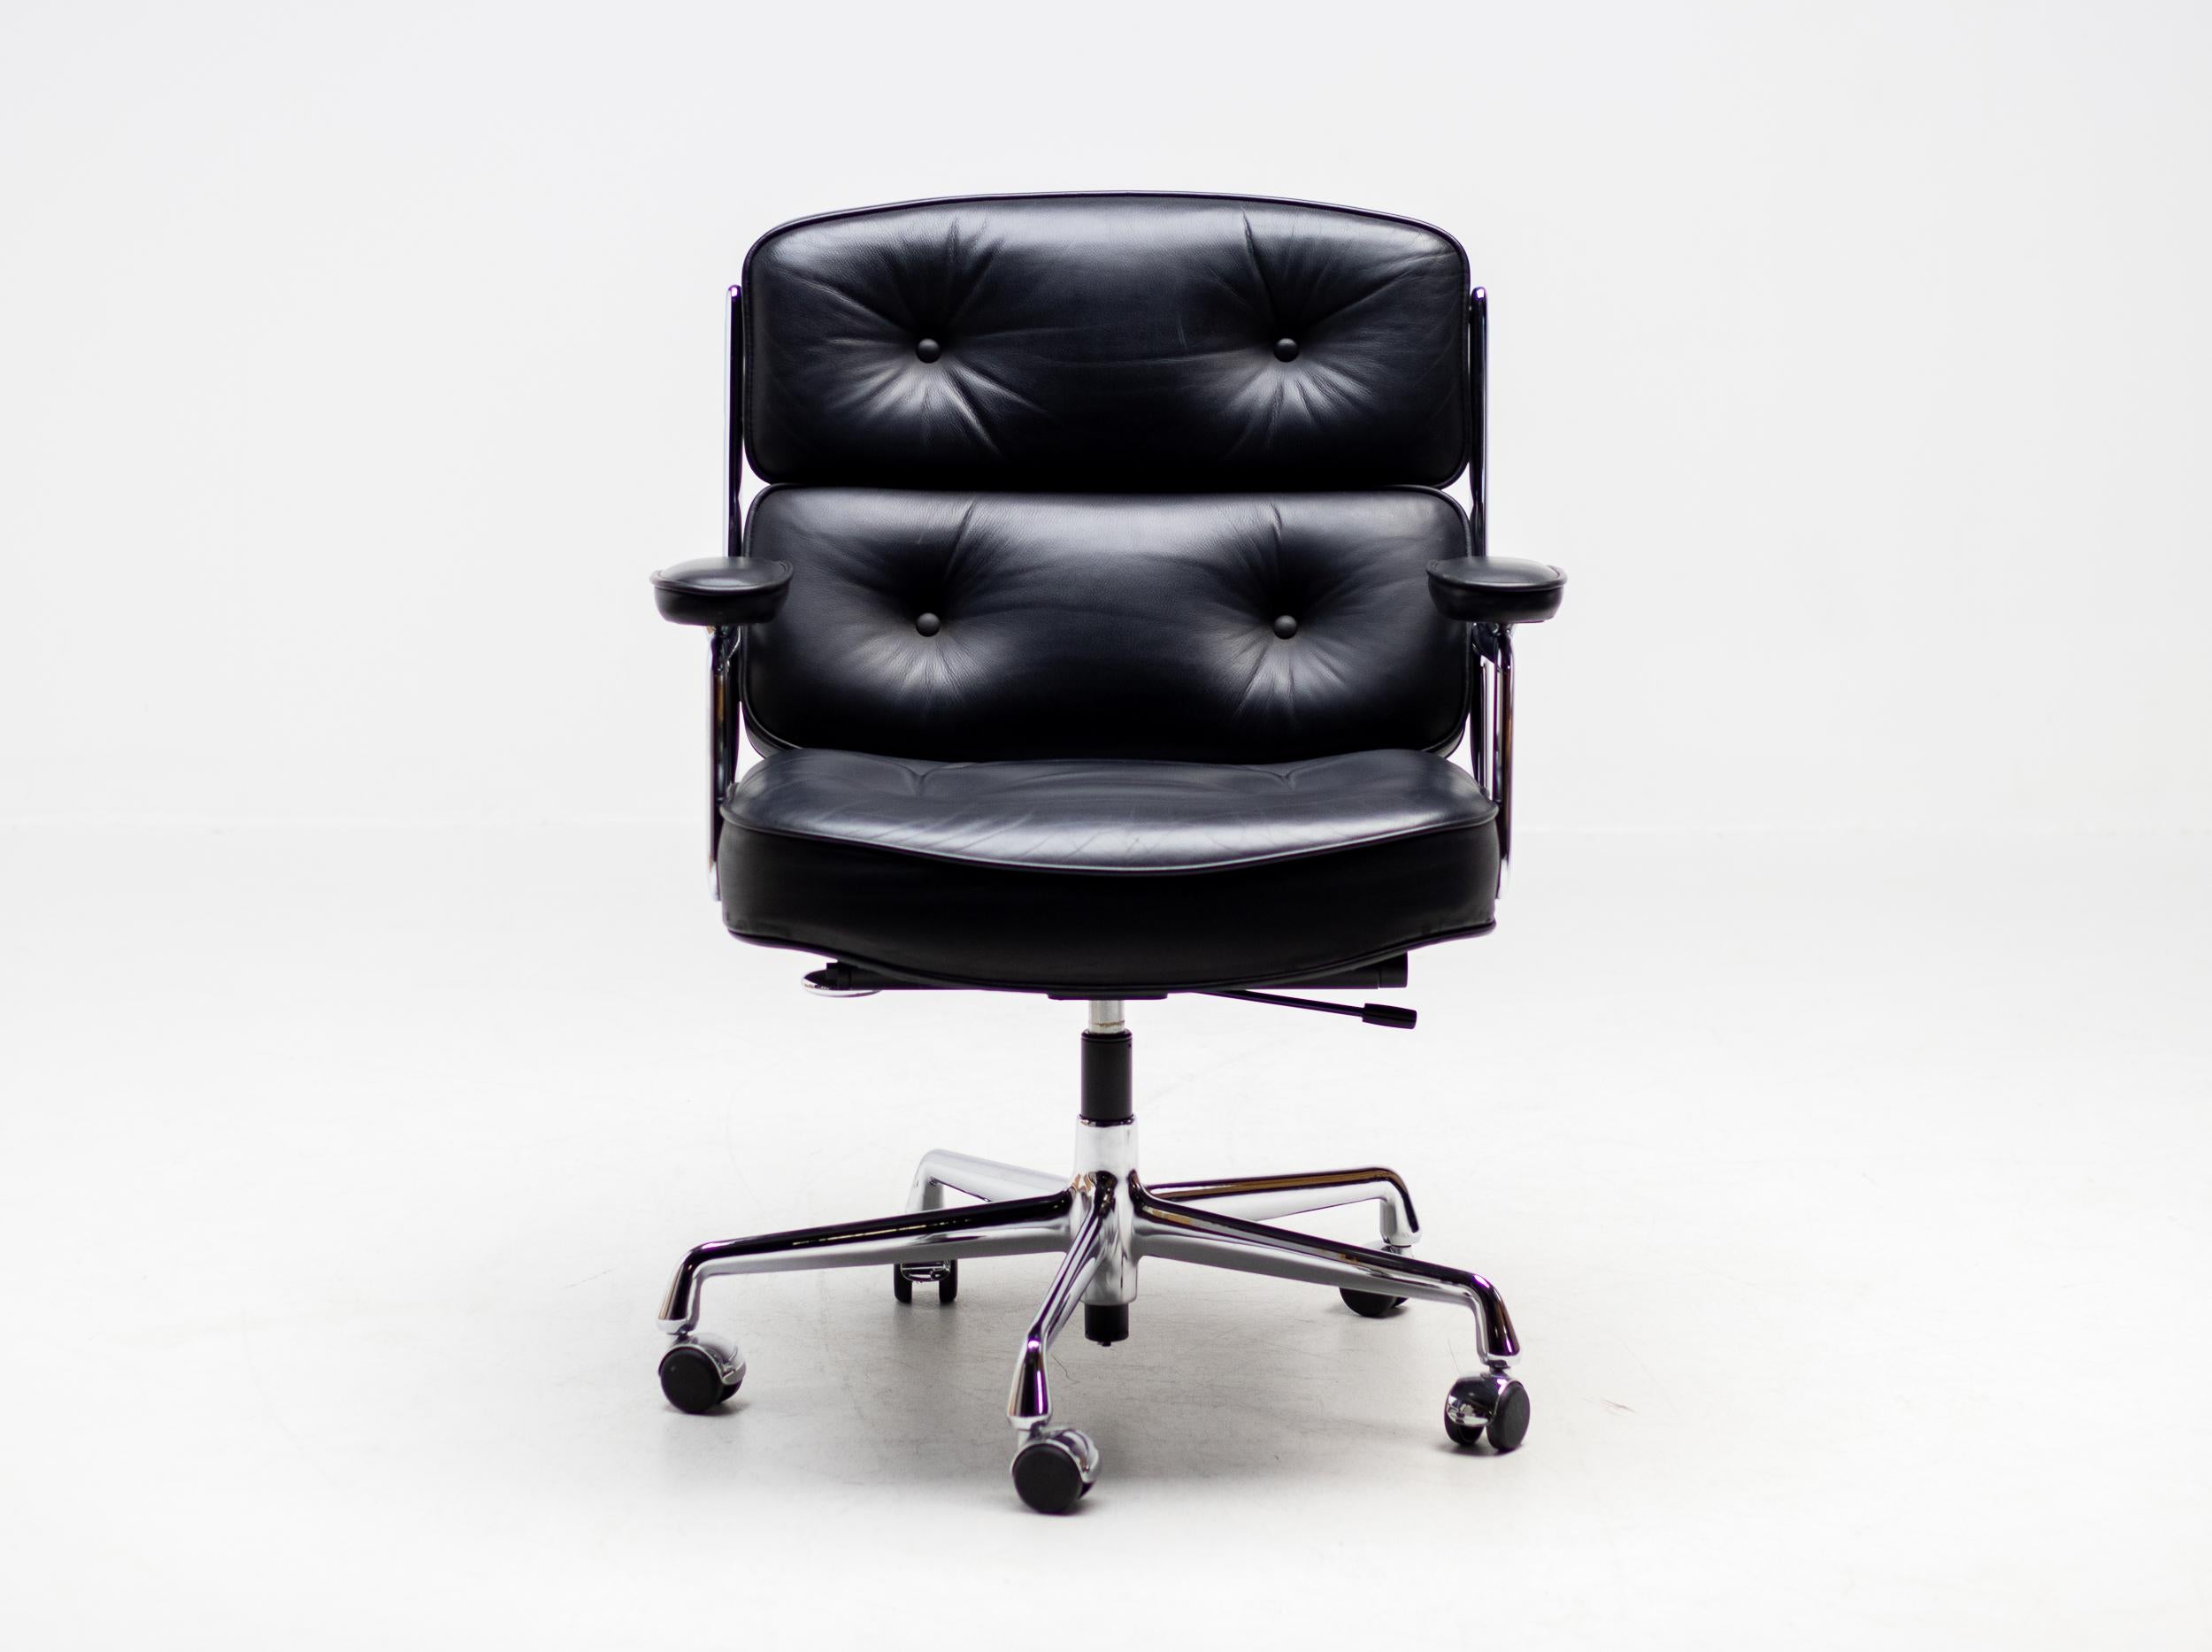 Also known as the time-life chair, this iconic piece was originally created for the executive floors of New York City’s Time-Life Building. The generously sized Eames Executive Chair (1960) tilts, swivels, and has a height-adjustable seat with